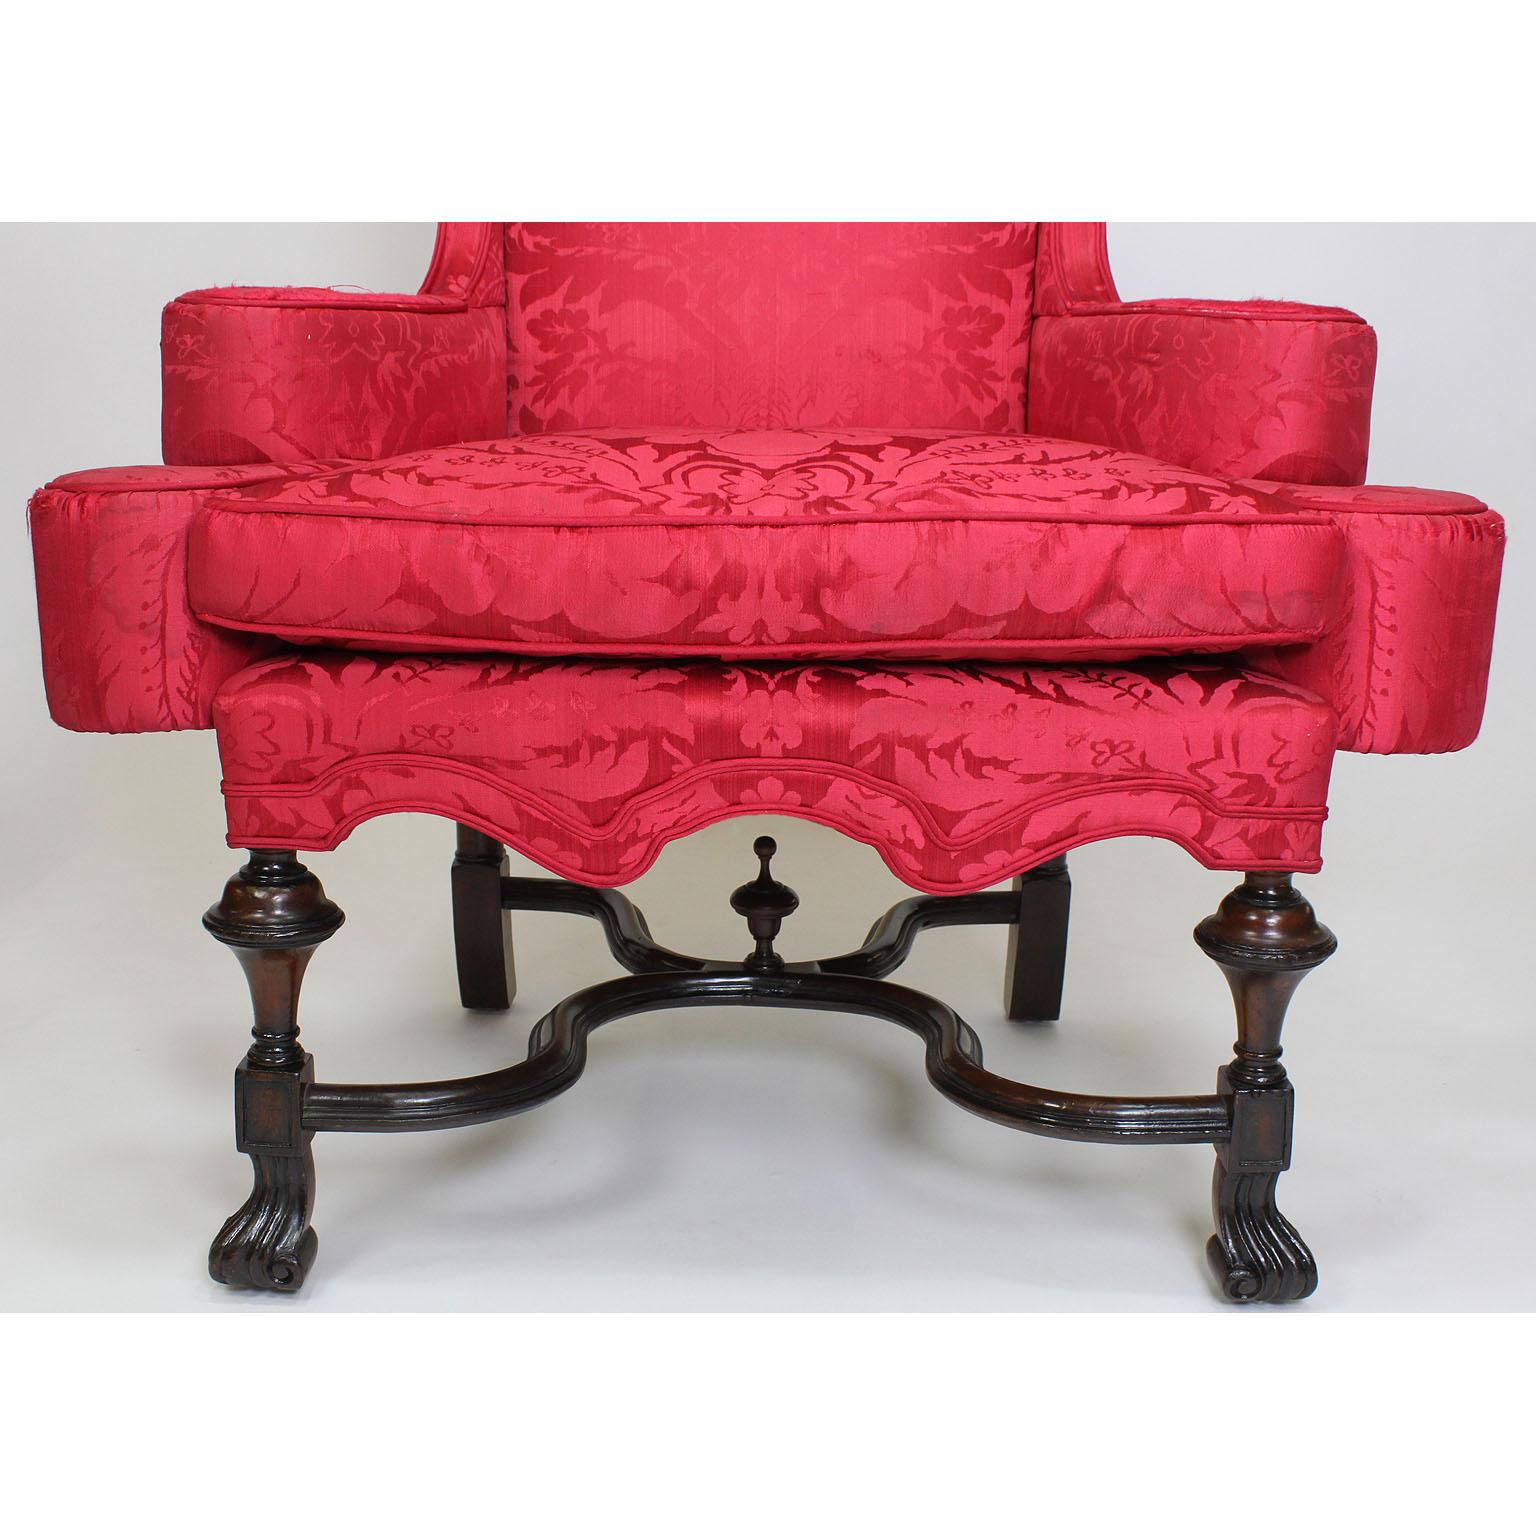 Rare Pair of English 19th Century William & Mary Style Mahogany Throne Armchairs For Sale 1